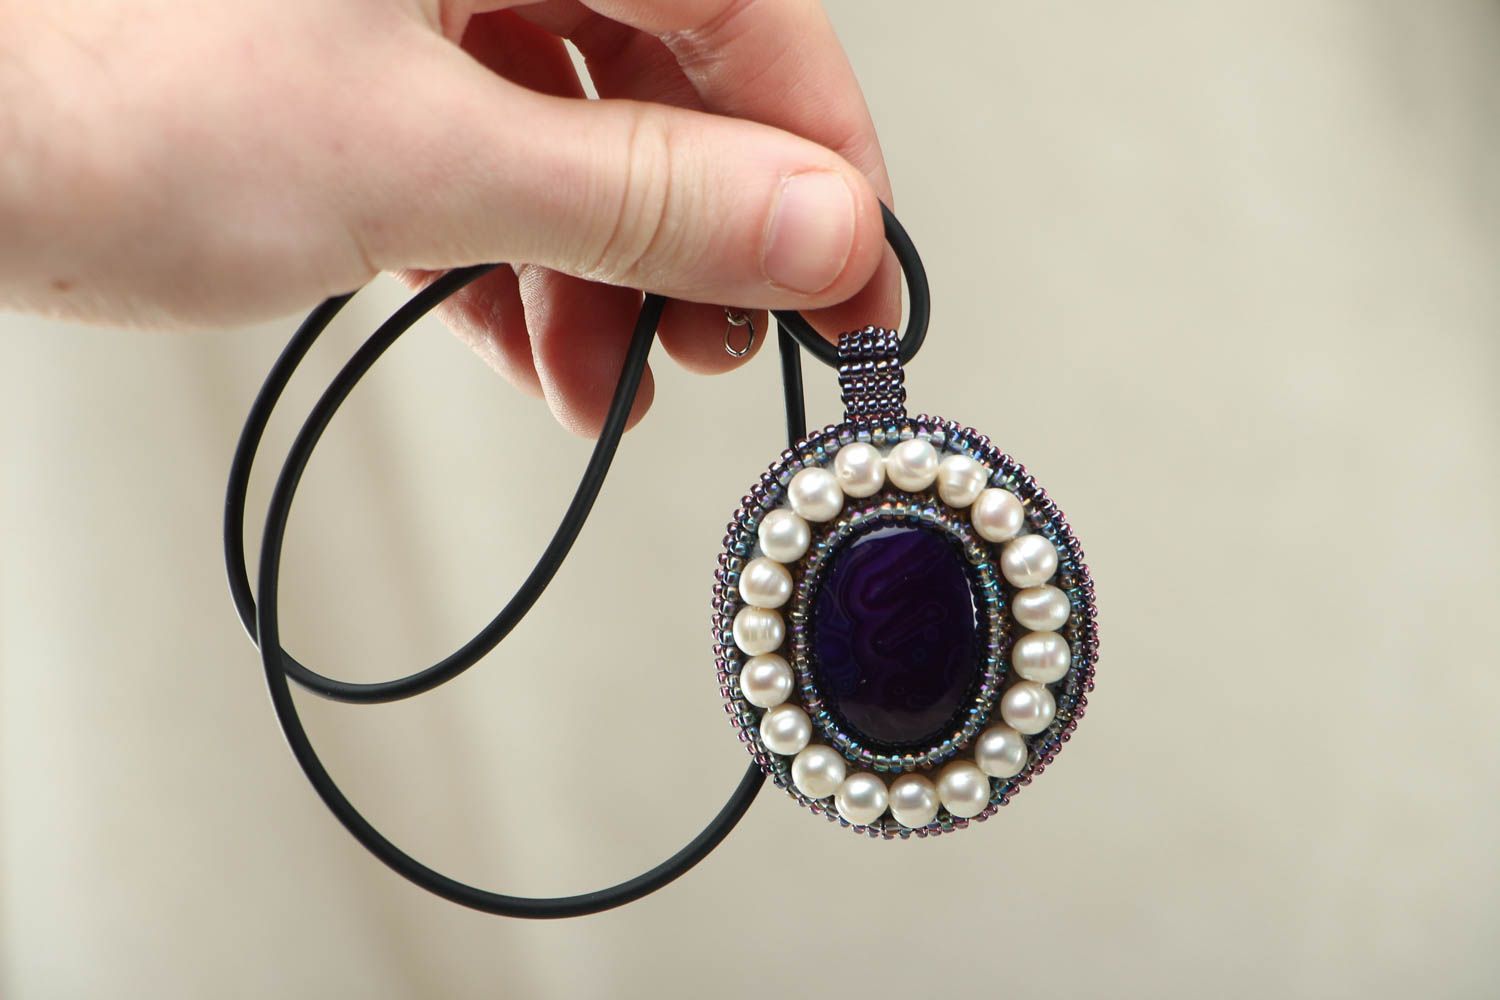 Homemade pendant with amethyst and pearls photo 4